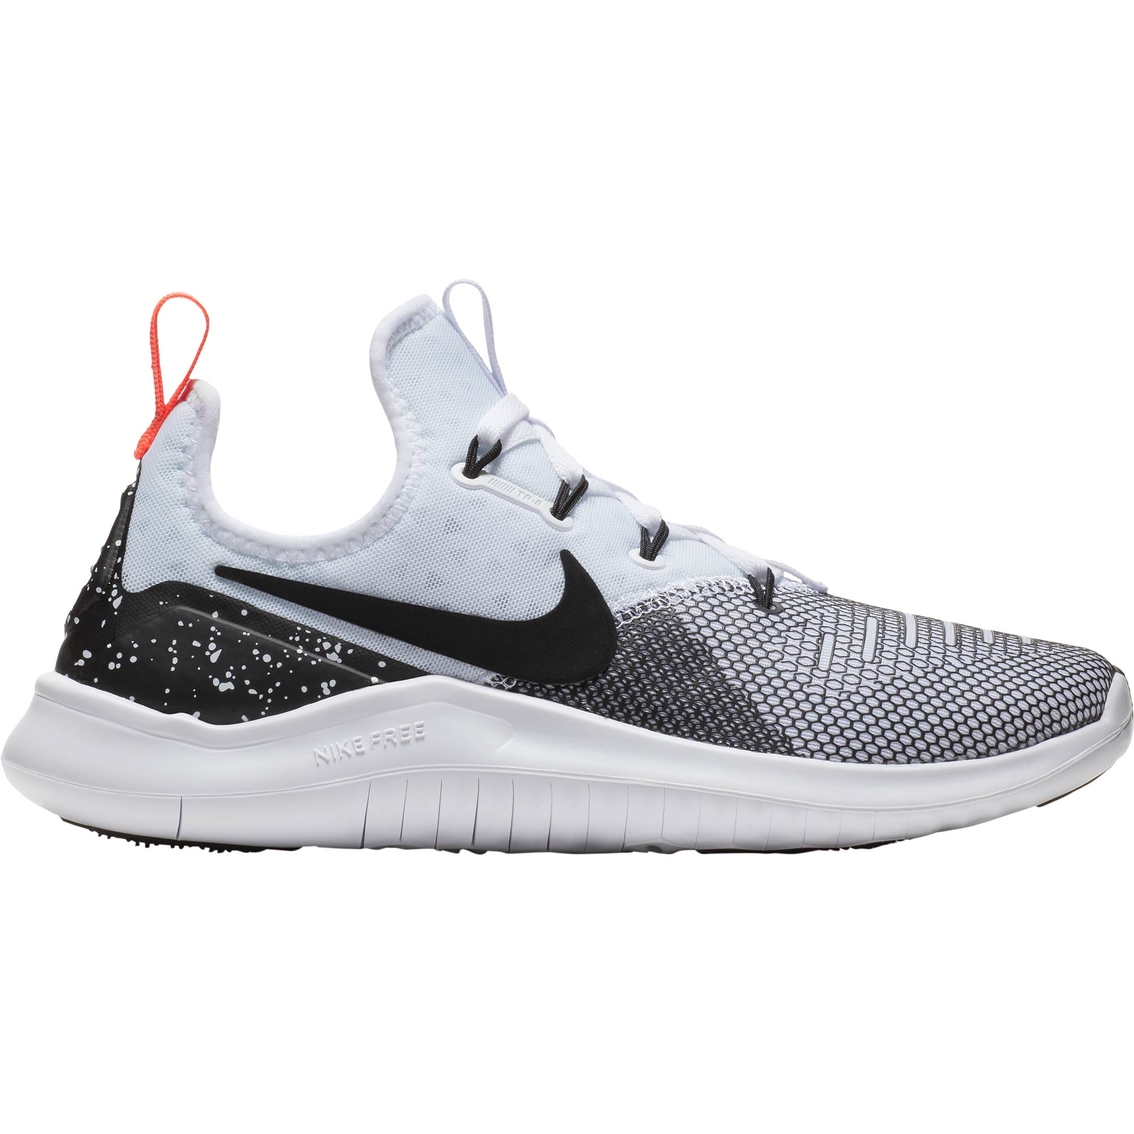 womens nike free trainer, OFF 78%,Buy!